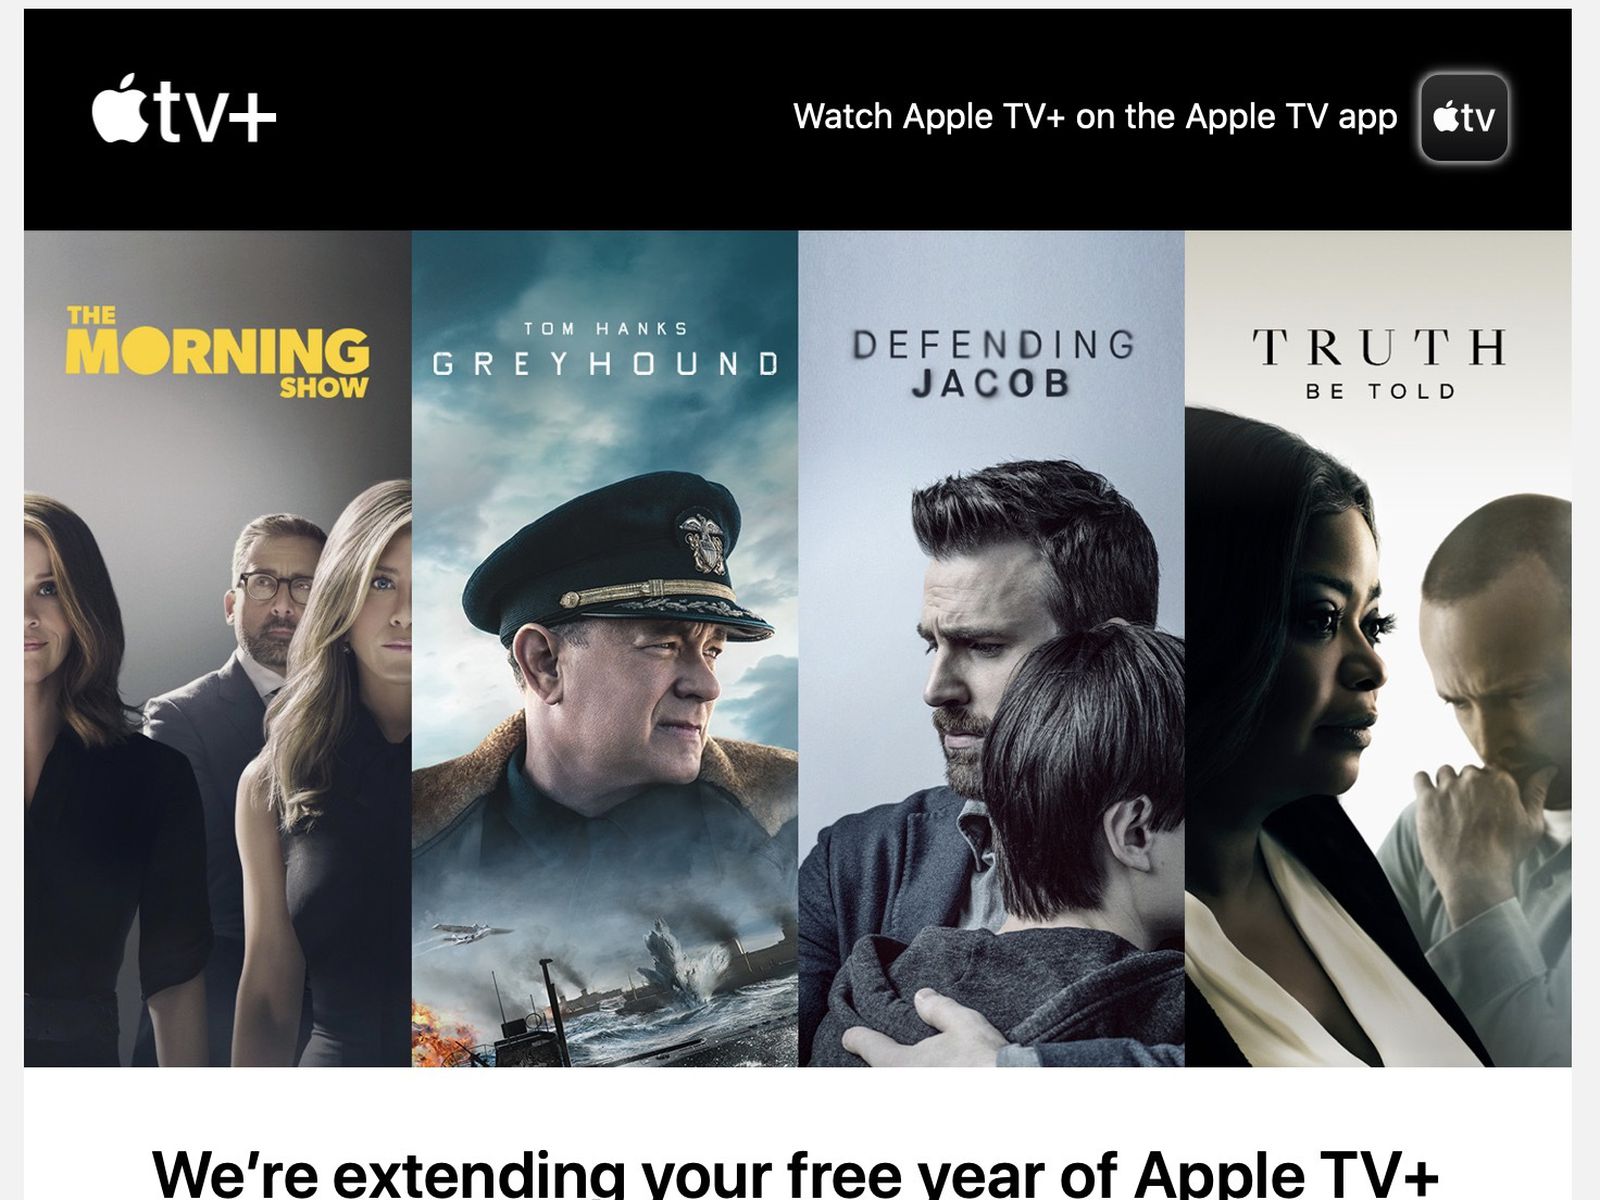 Apple Sending Emails Letting Apple TV+ Know About Extended Trial Access - MacRumors